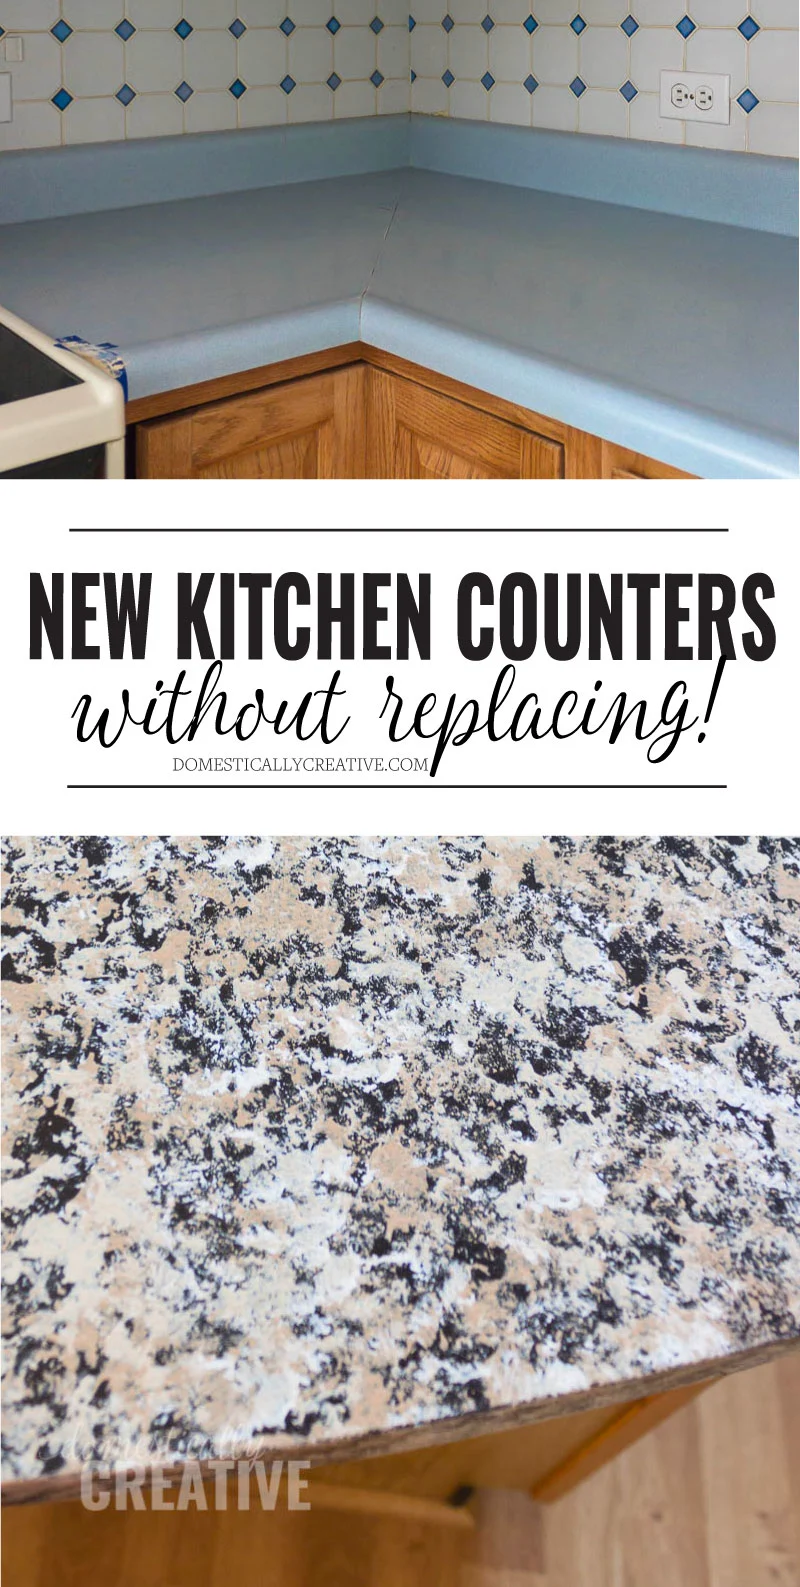 How To Update Kitchen Counters Without, Replace Countertop Without Replacing Cabinets